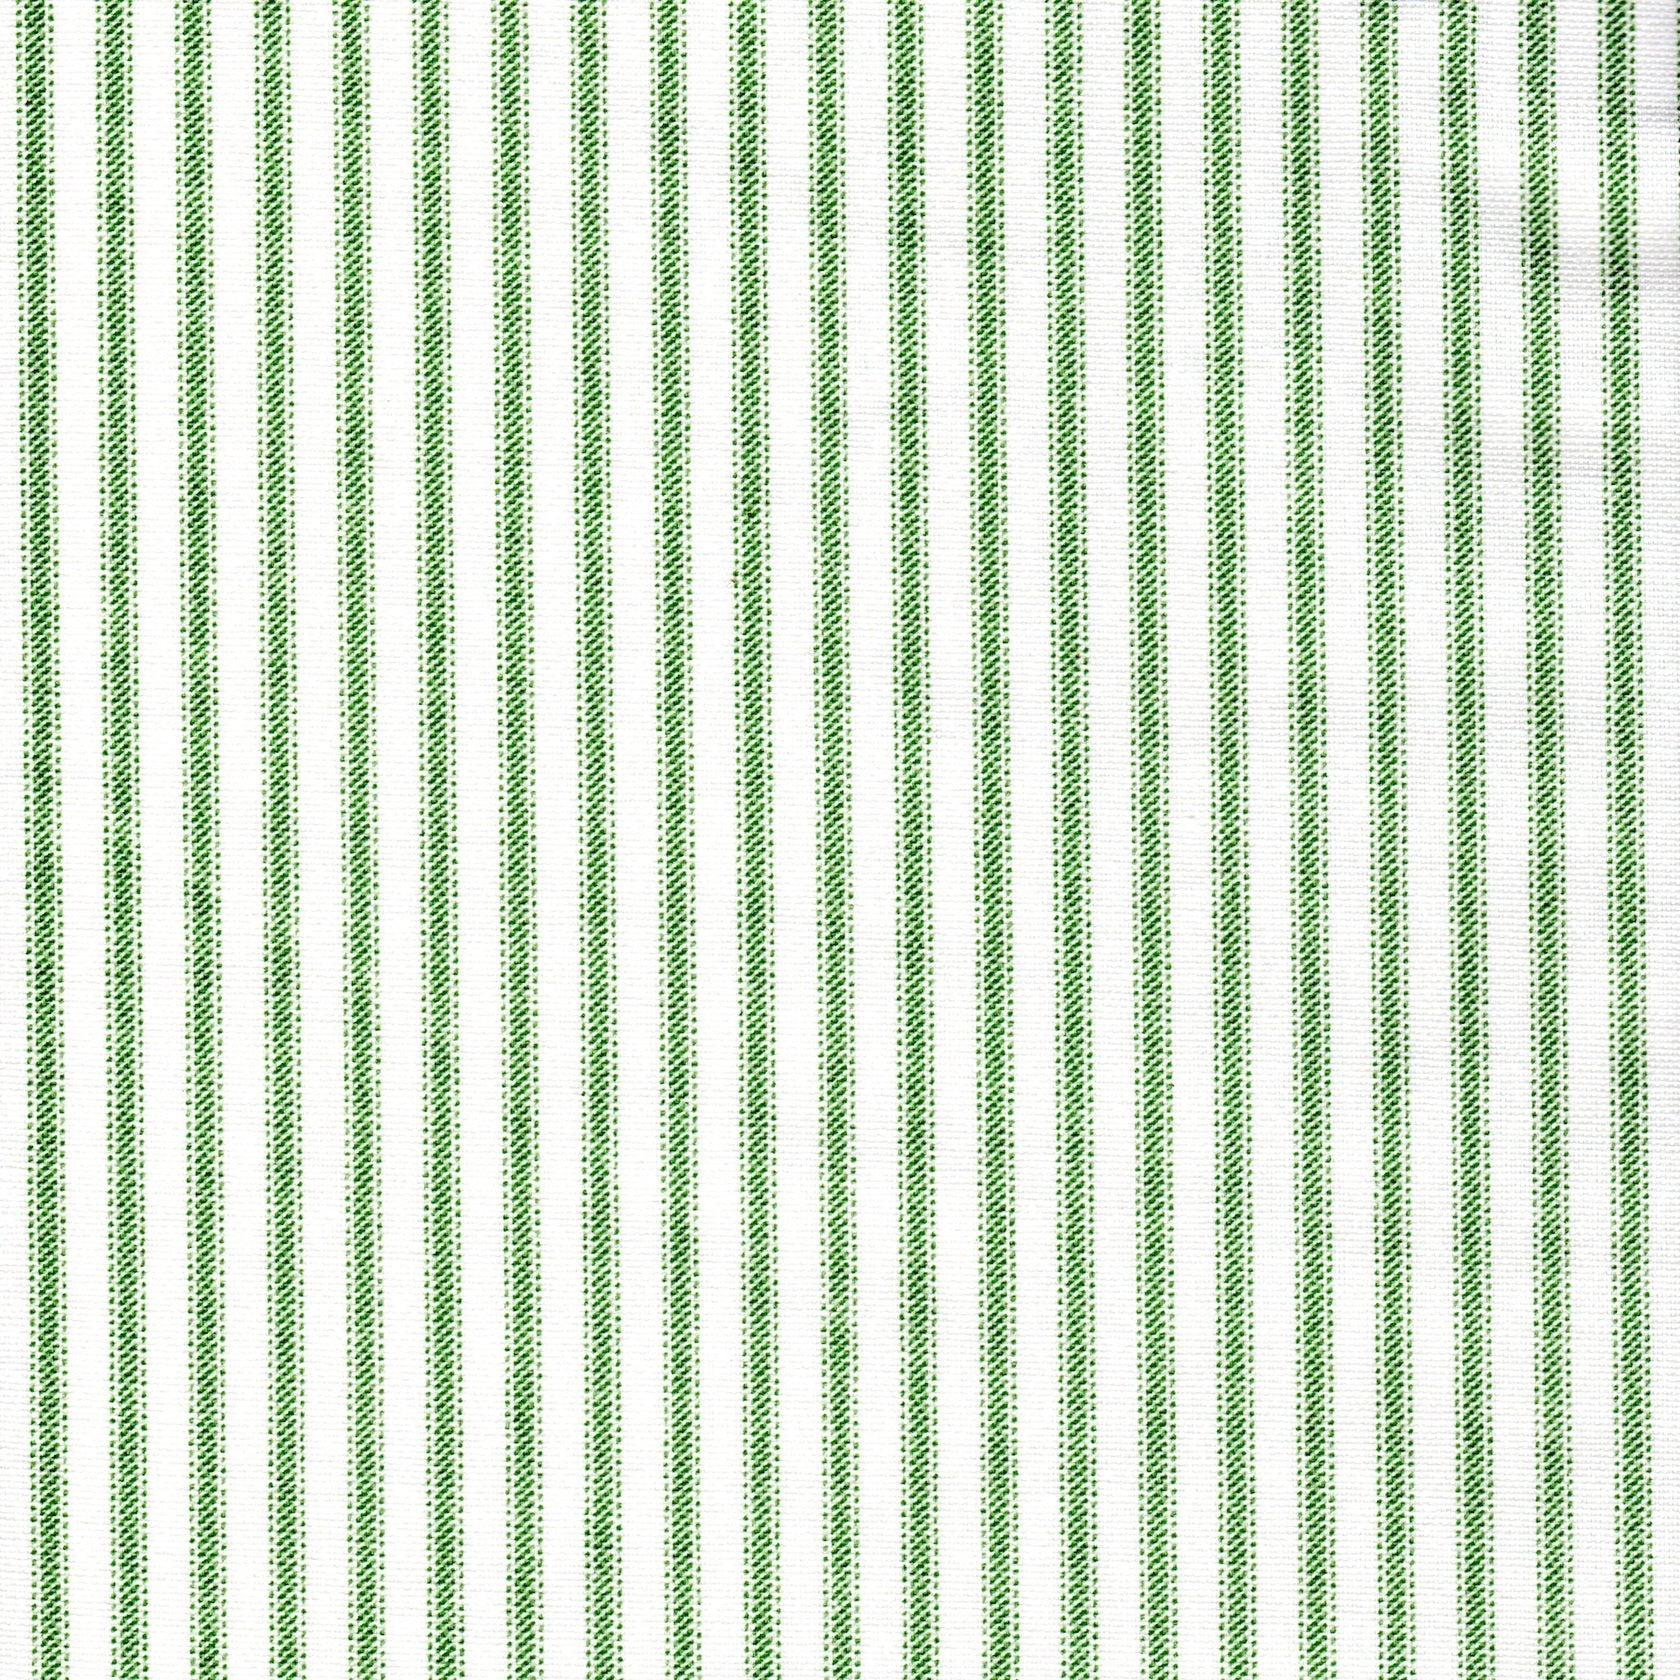 rod pocket curtains in Classic Pine Green Ticking Stripe on White